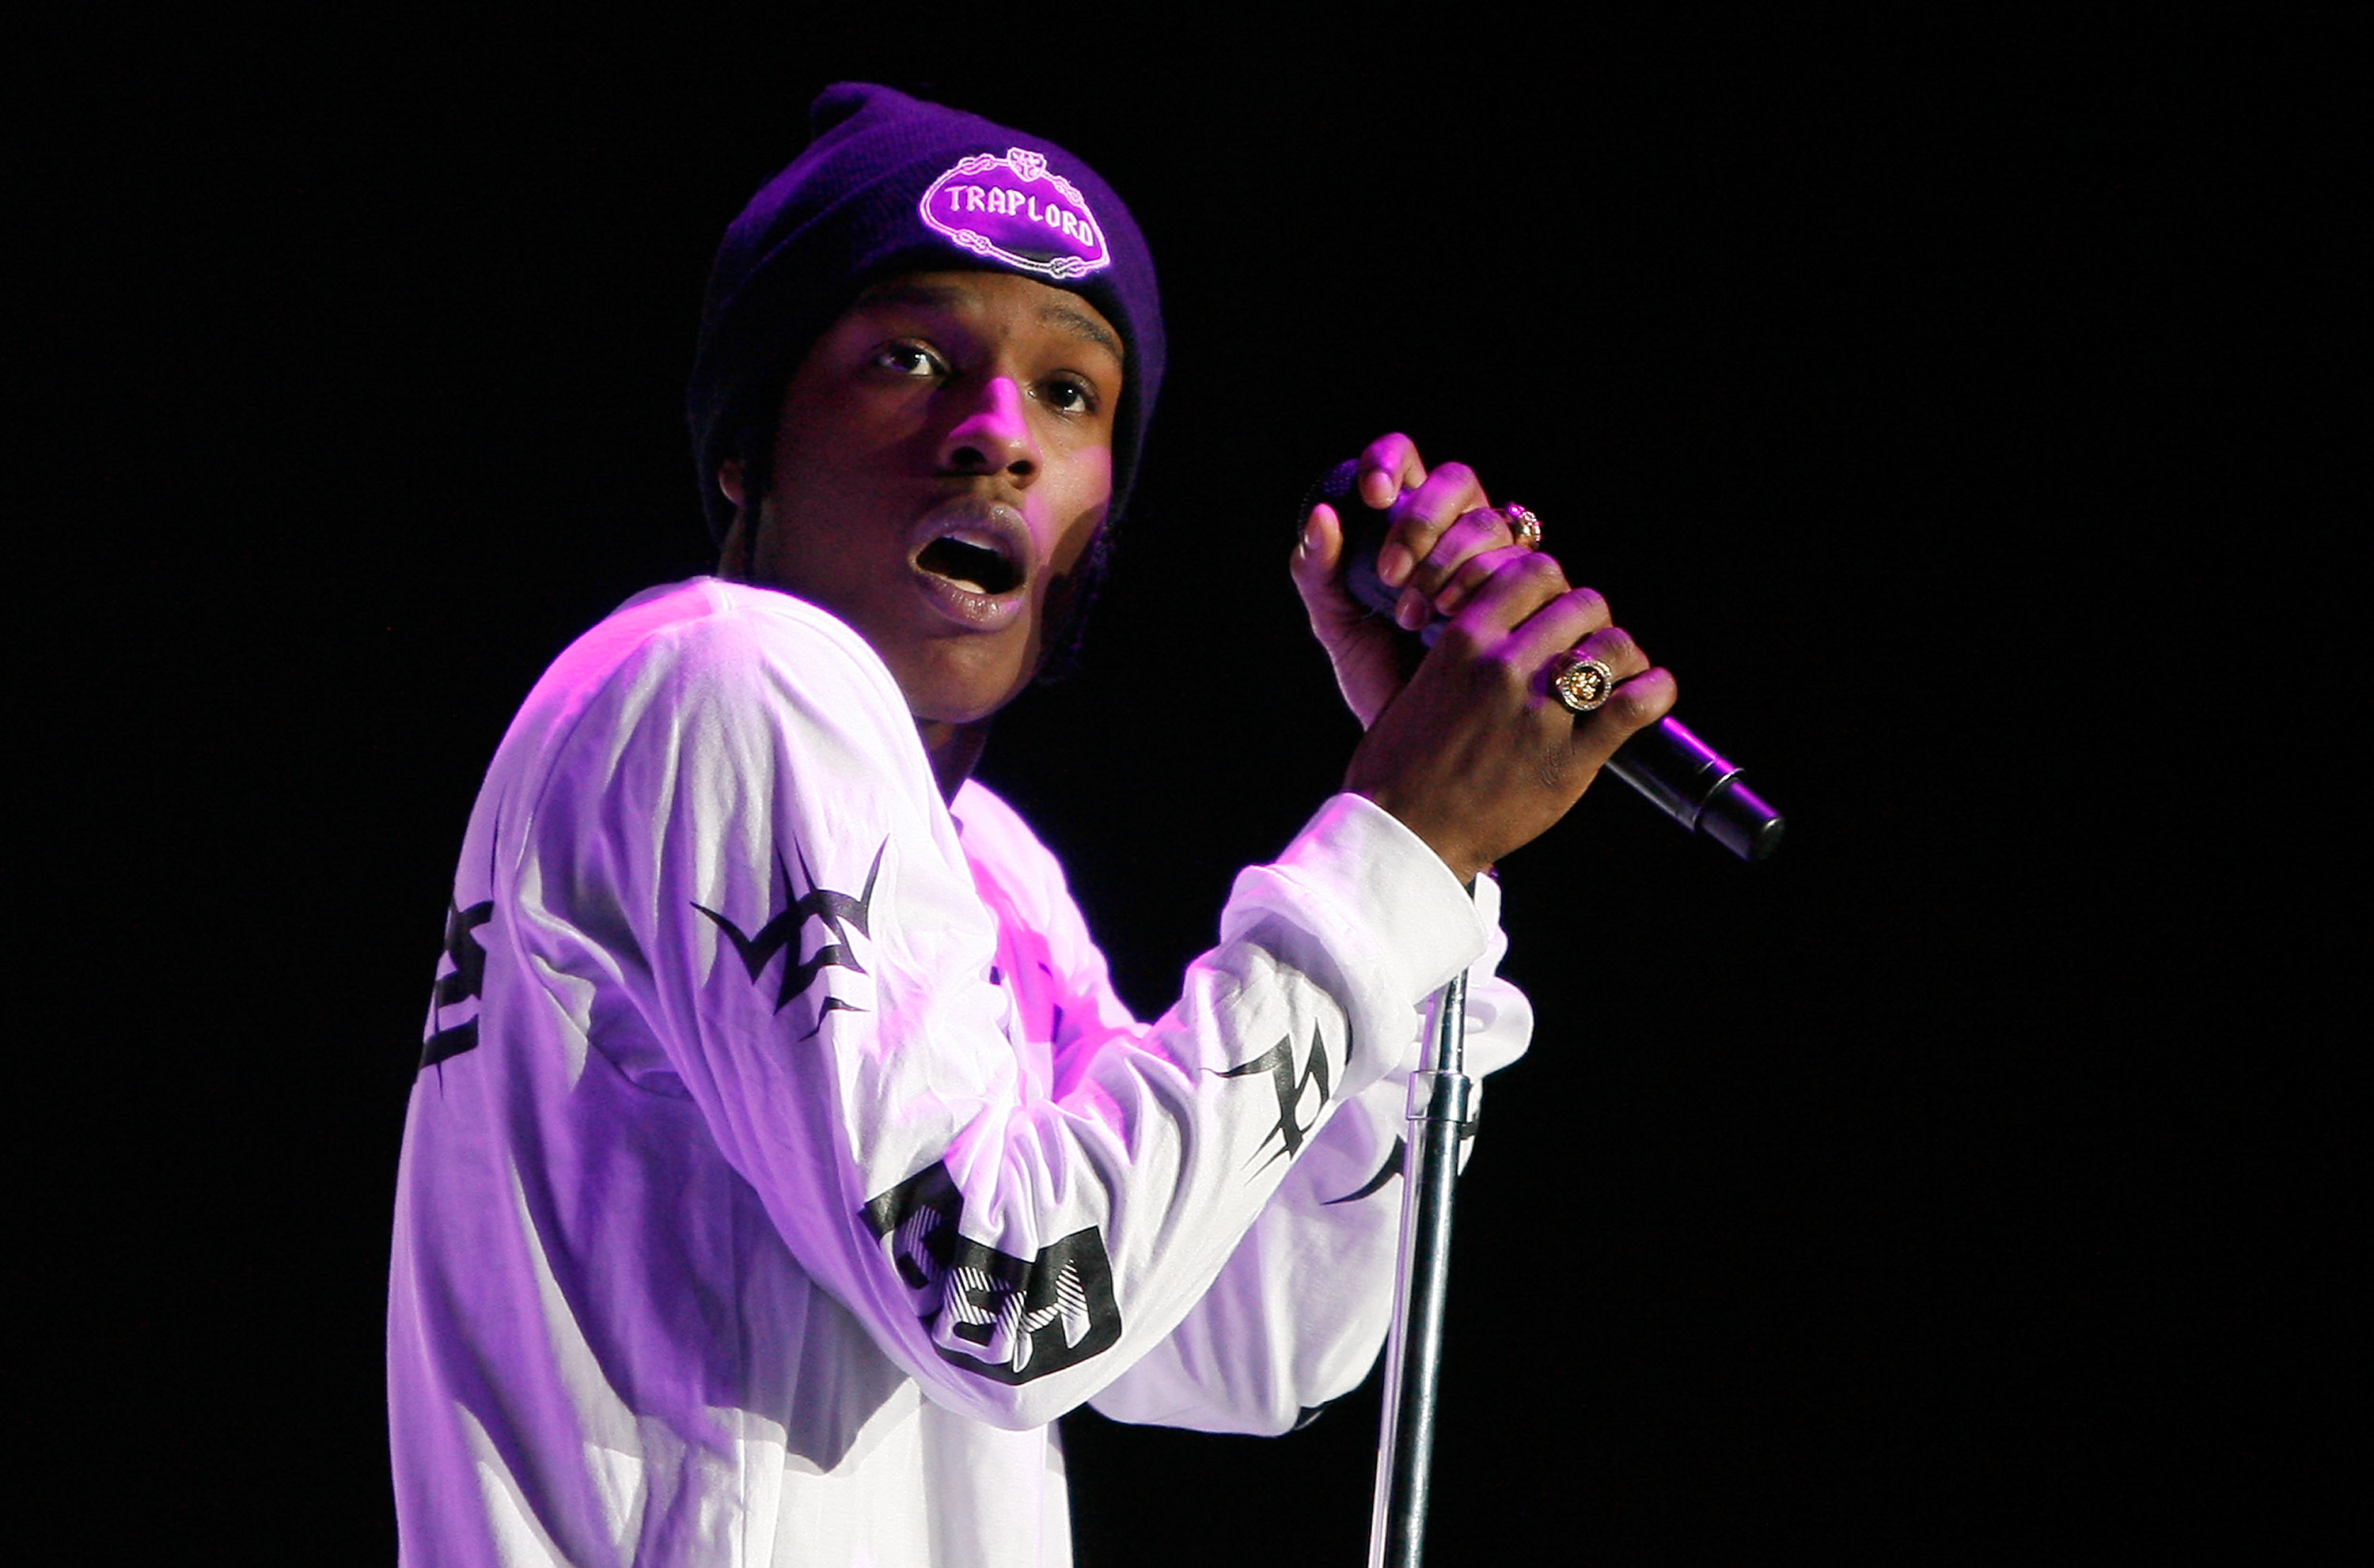 A$AP Rocky “Testing” Fans With New Album, See How They React